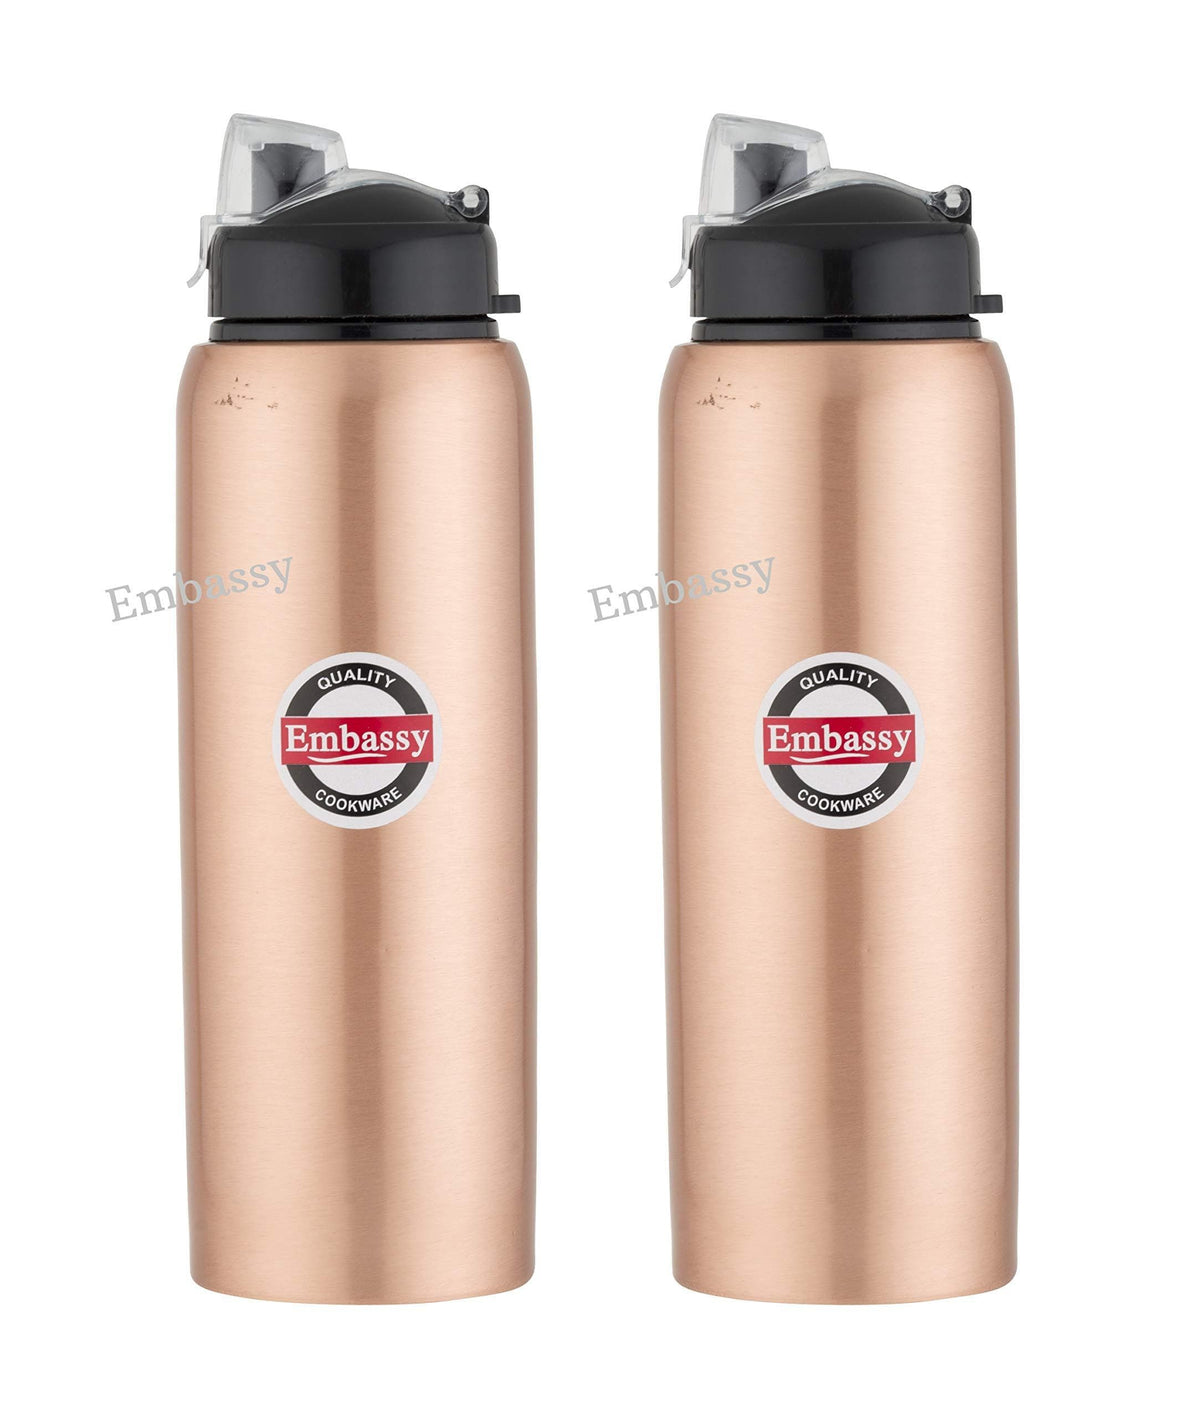 Embassy Premium Copper Water Bottle, Sipper, 1000 ml, Pack of 2 - Leak-Proof, Jointless and Pure Copper - KITCHEN MART